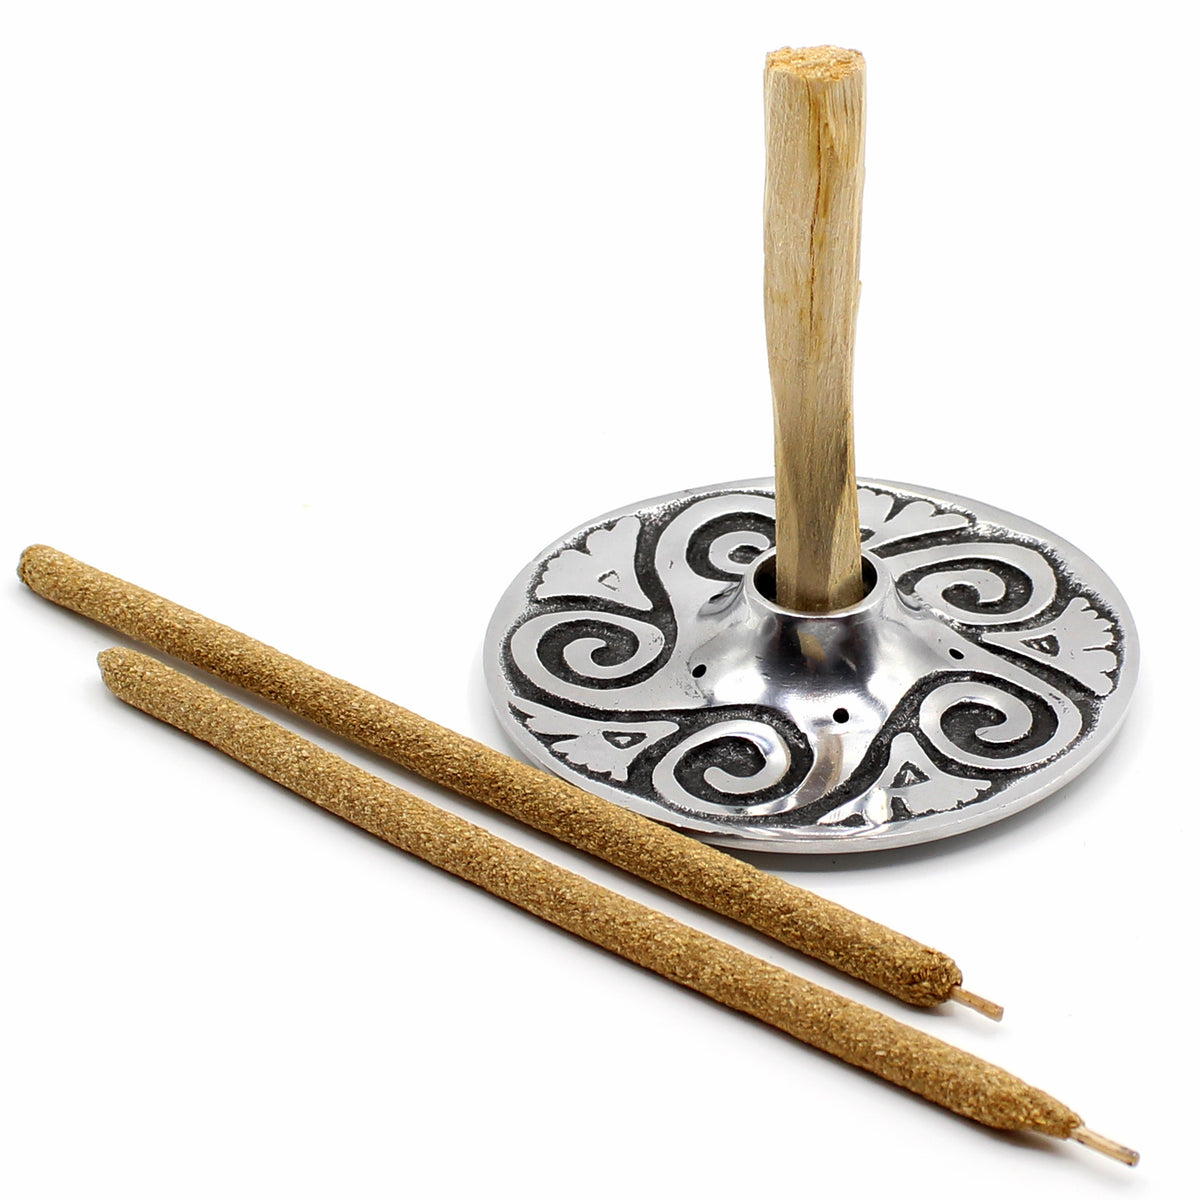 Palo Santo / Incense Holder – SIMPLE AS IS